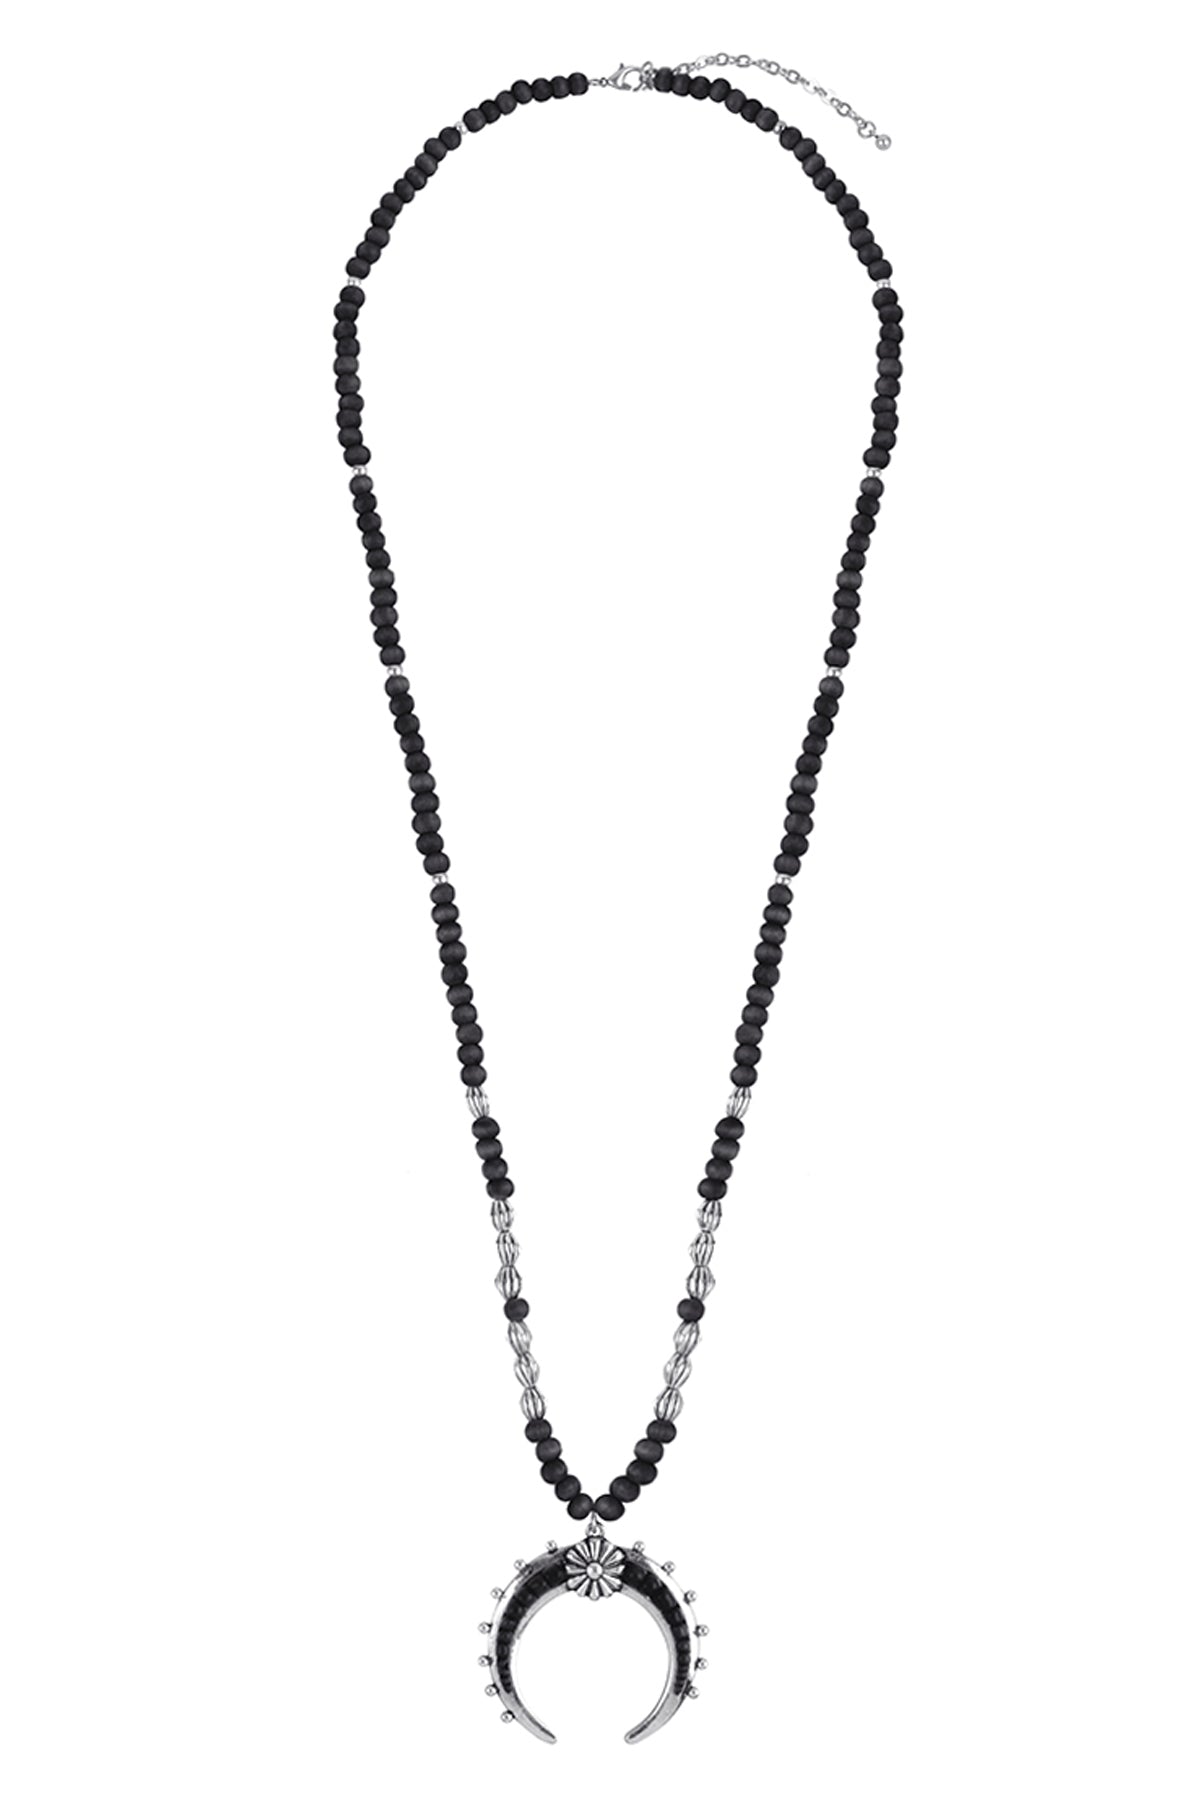 30" TUSK HORN WOOD LONG NECKLACE  (NOW $7.25 ONLY!)